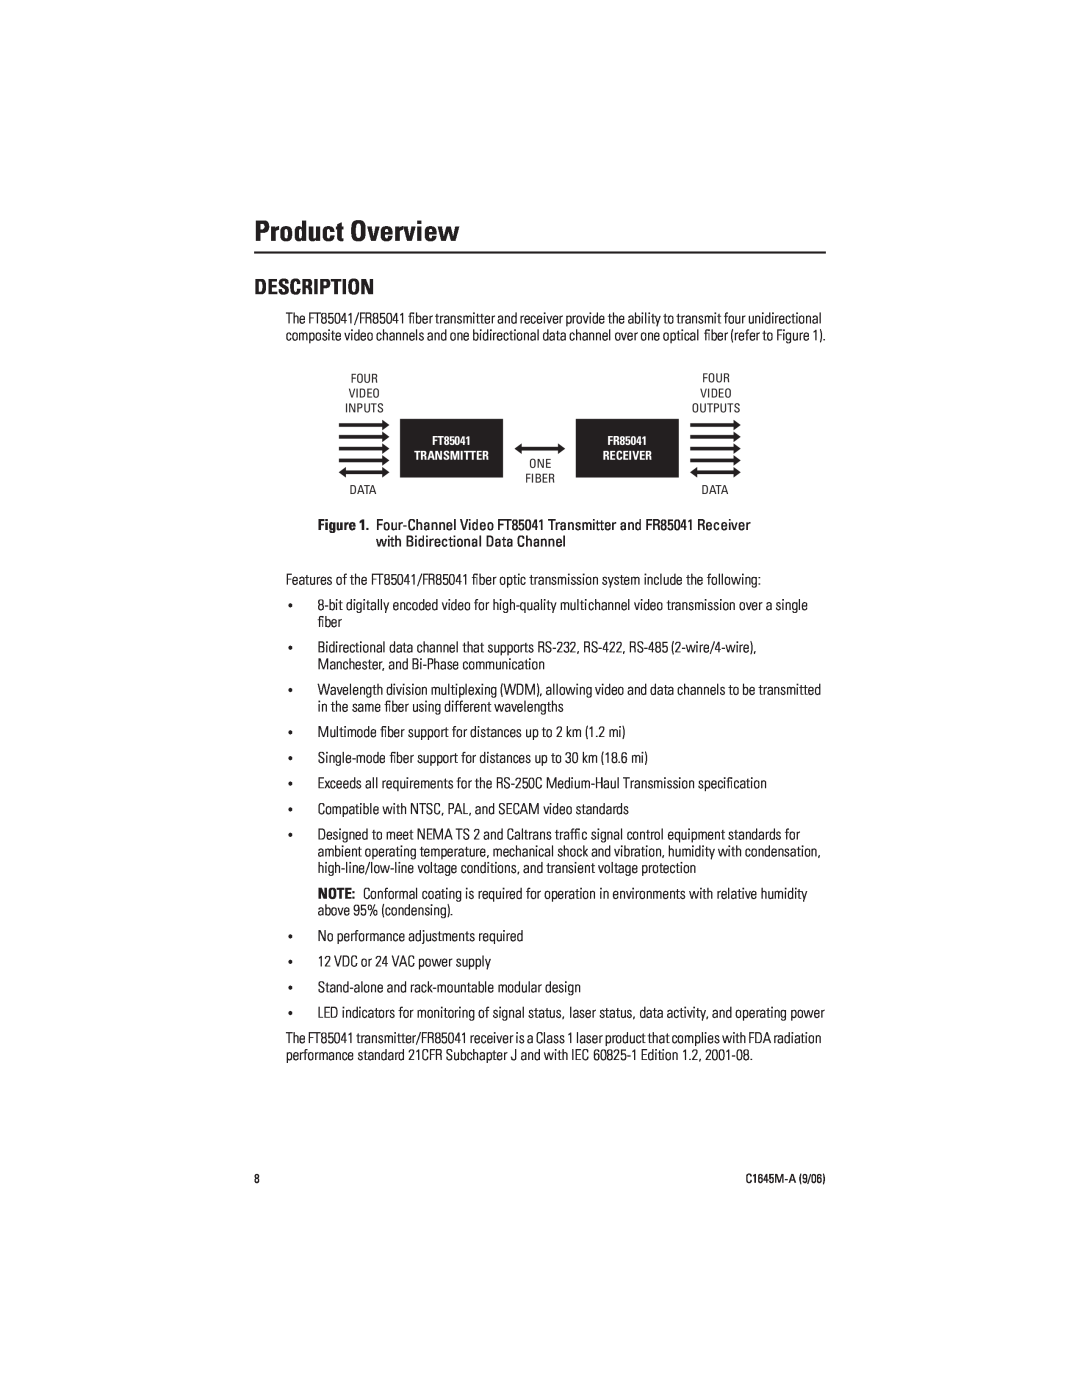 Pelco FR85041 installation manual Product Overview, Description 